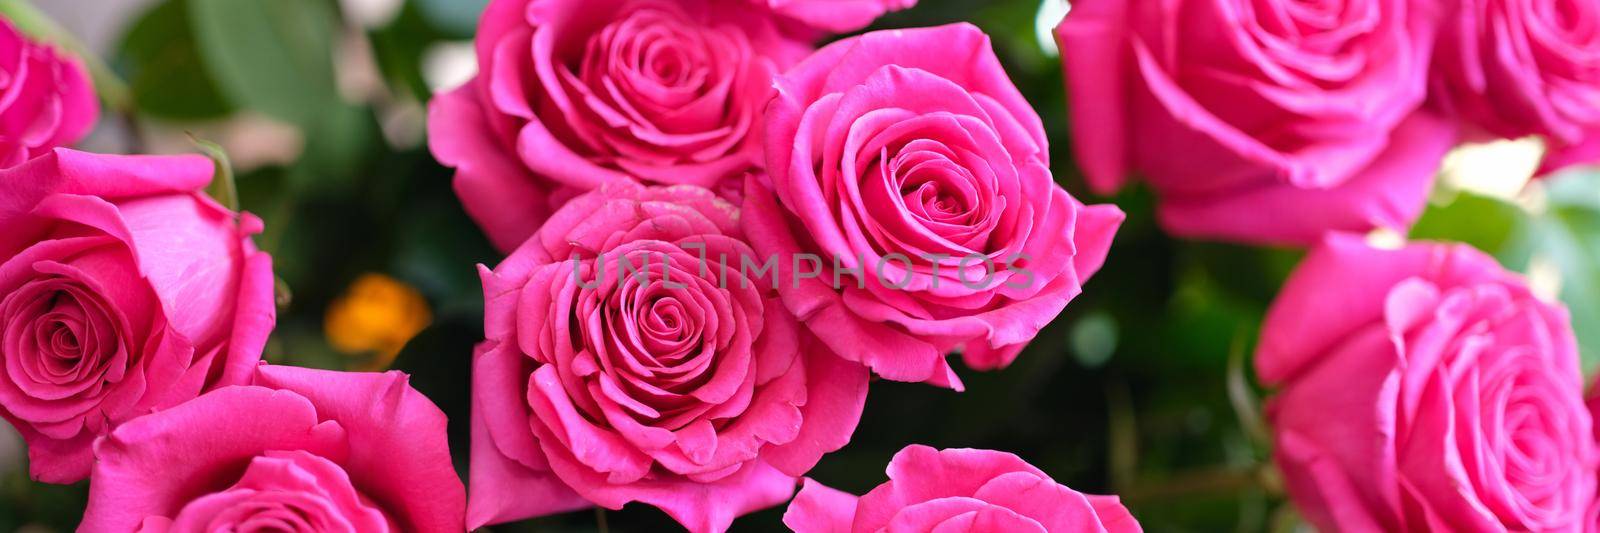 Bouquet of beautiful blossoming pink roses. Fragrant romantic photo frame graphic